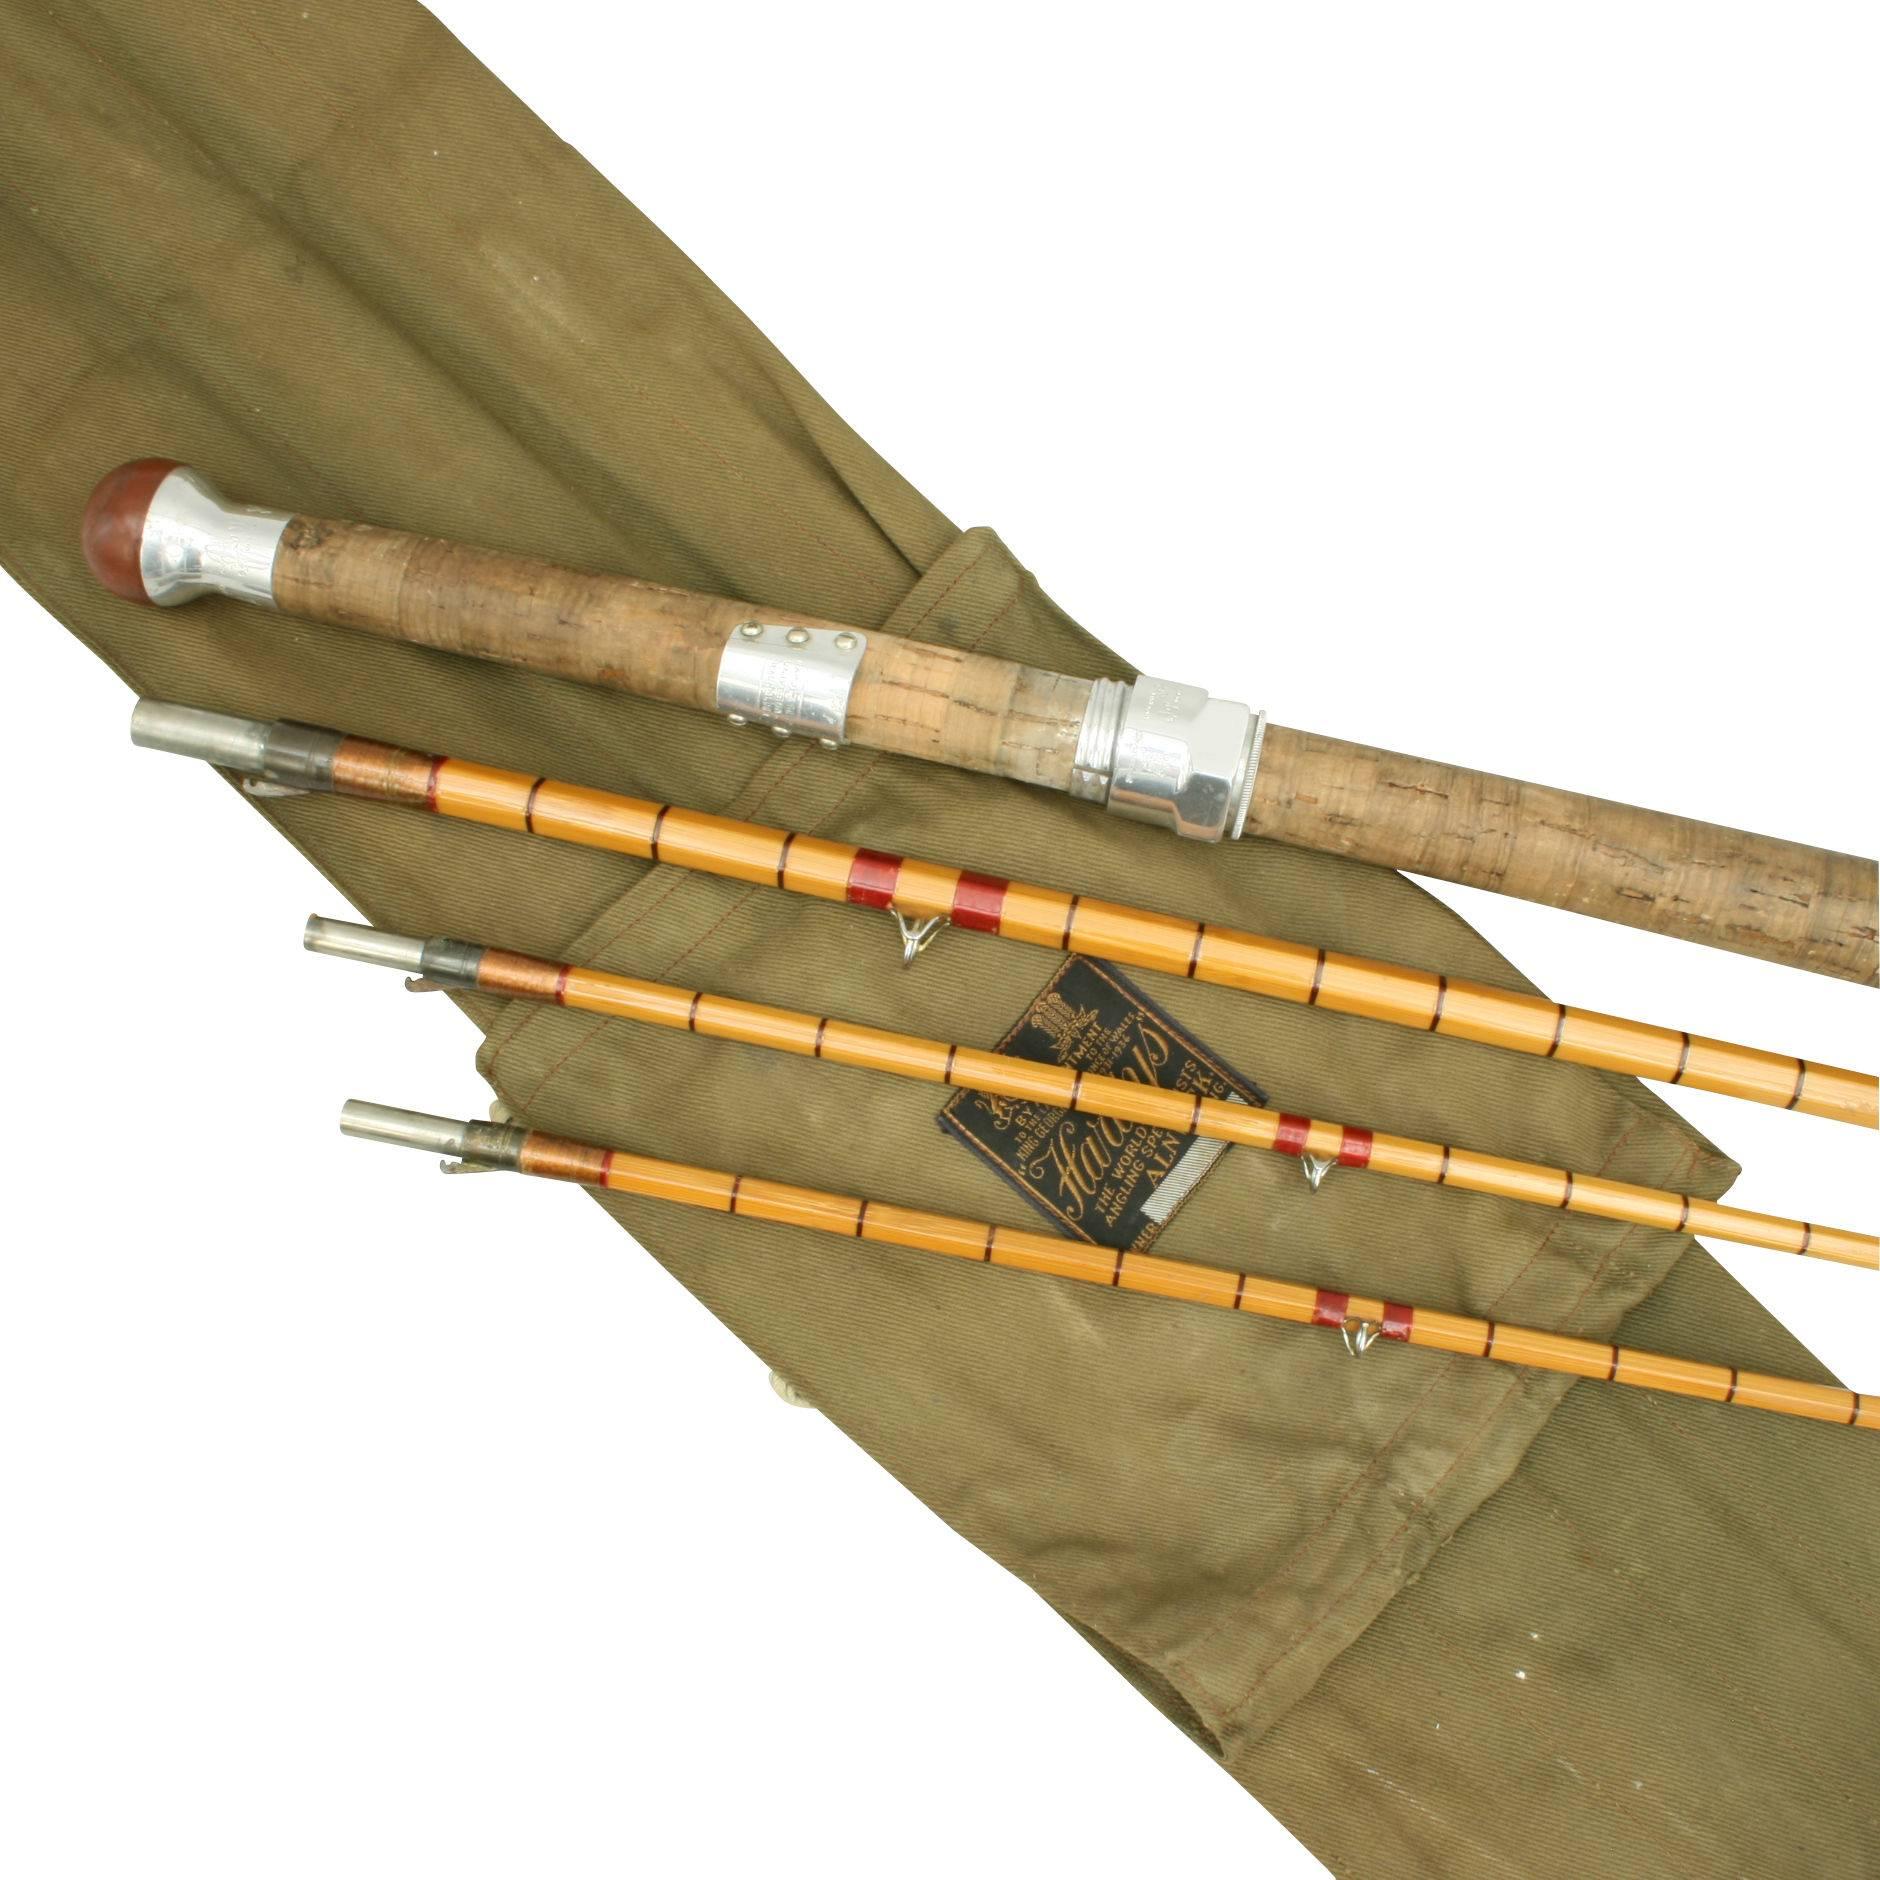 Hardy 'The Wye' Palakona salmon fishing rod.
A fine double-handed salmon fly fishing rod by Hardy Bros. of Alnwick, The Wye'. This is a good 12' 5' split cane Palakona three-piece rod with original spare tip and canvas Hardy bag. The rod is in